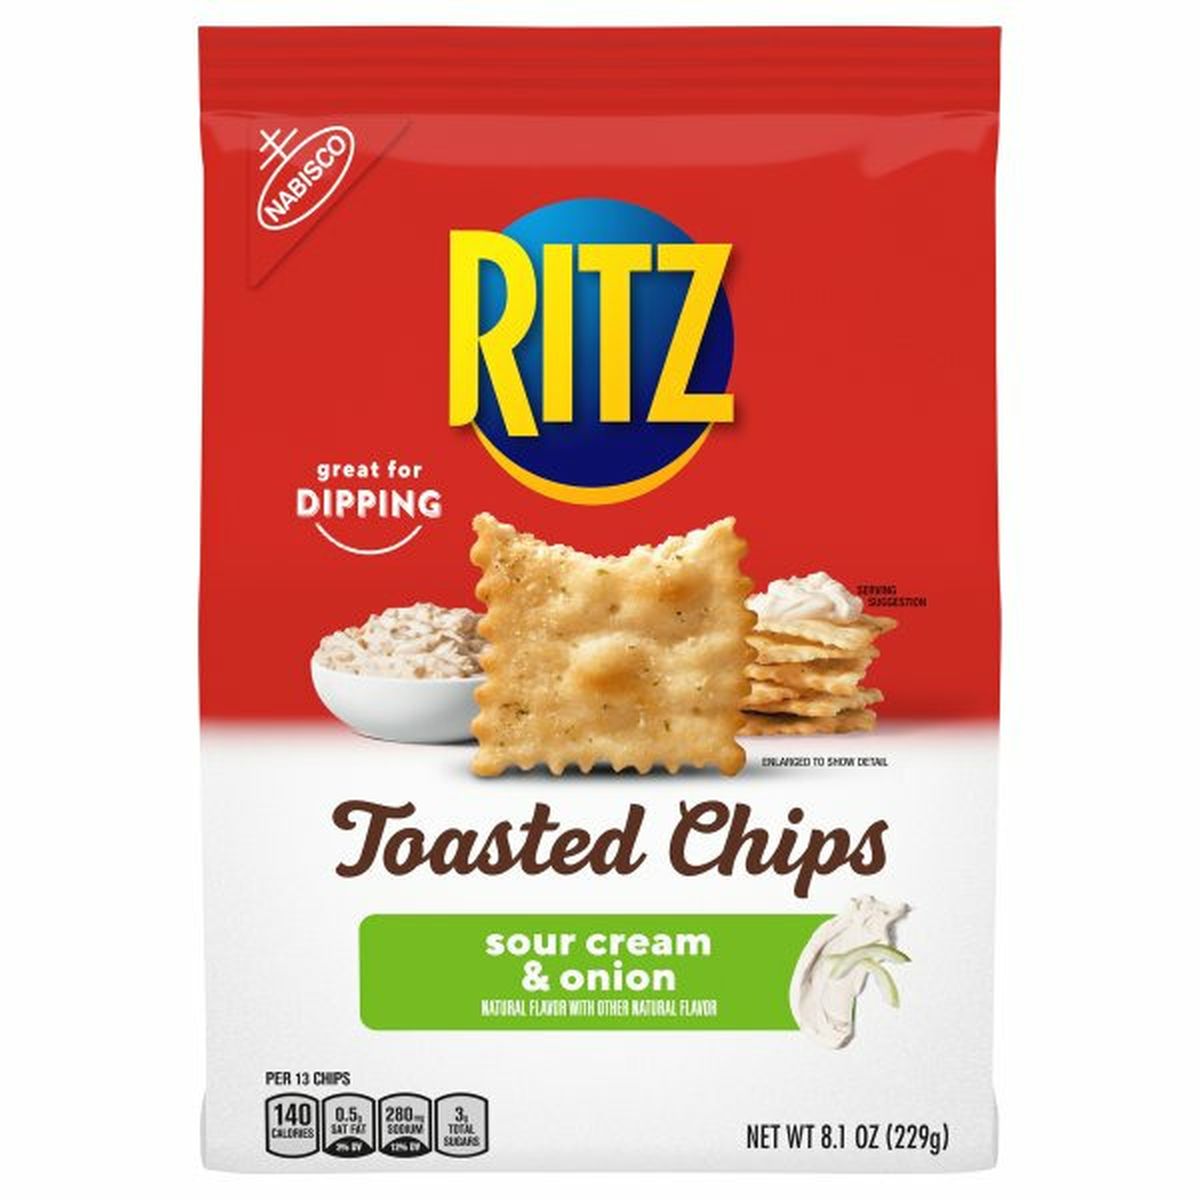 Calories in Ritz Toasted Chips, Sour Cream & Onion